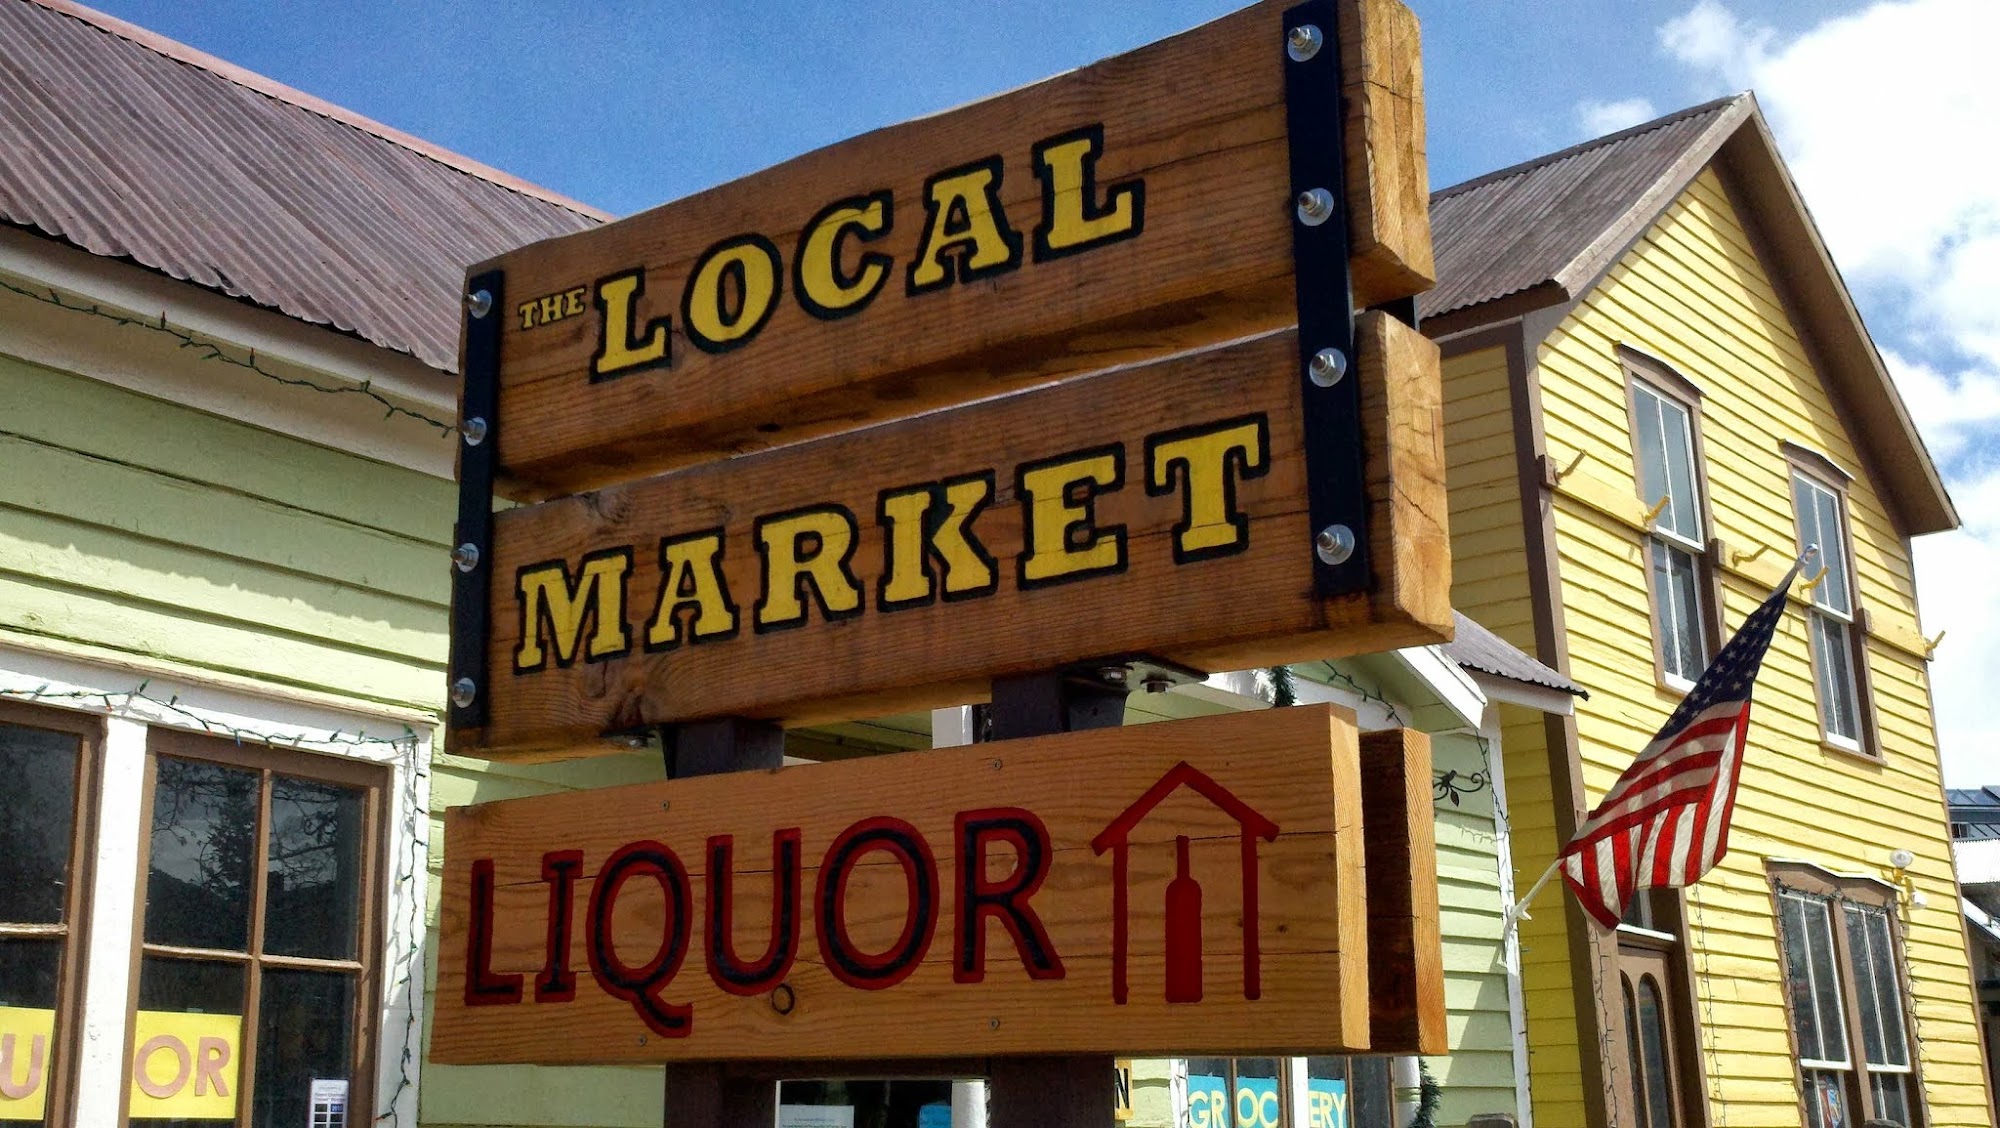 The Local Market and Liquor Shed